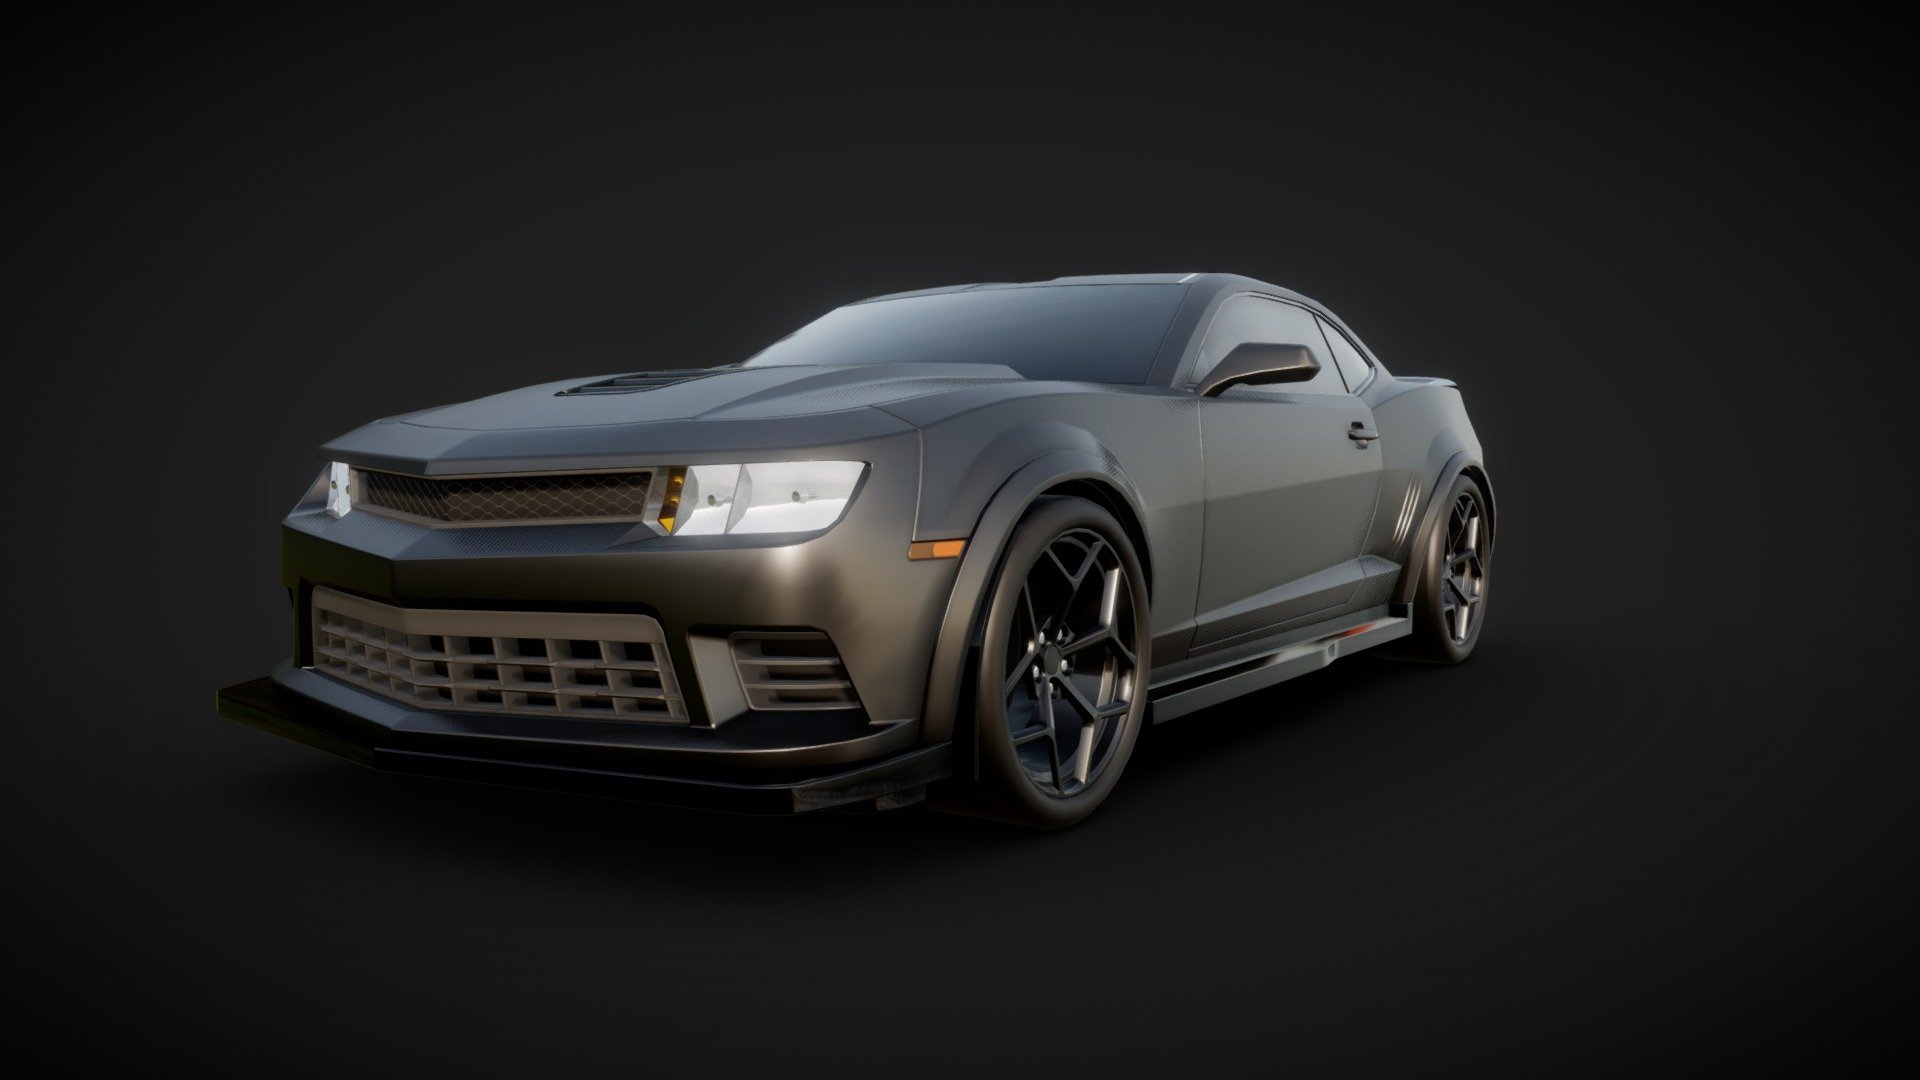 Camaro Z28 2014, a powerful muscle car ready to take over the race tracks with its mighty V8 engine. It's a mid-poly model ready to be used for games and animation.

Model includes detailed topology and custom normals.

If you got any questions, feel free to contact me 3d model